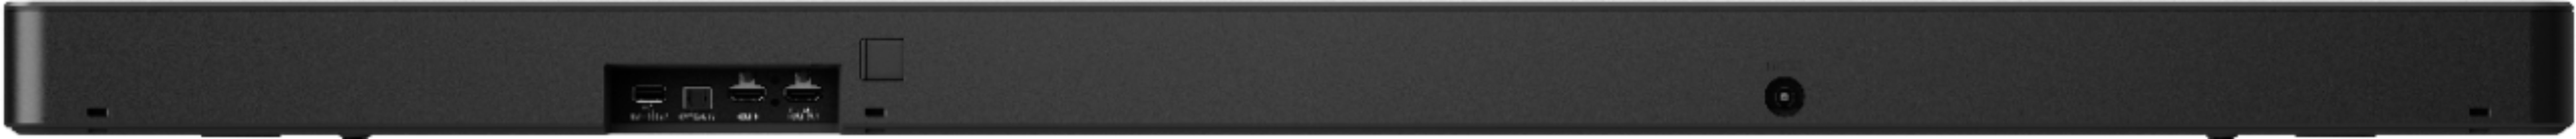 Back View: LG - 3.1-Channel 420W Soundbar with Wireless Subwoofer and DTS Virtual:X - Black